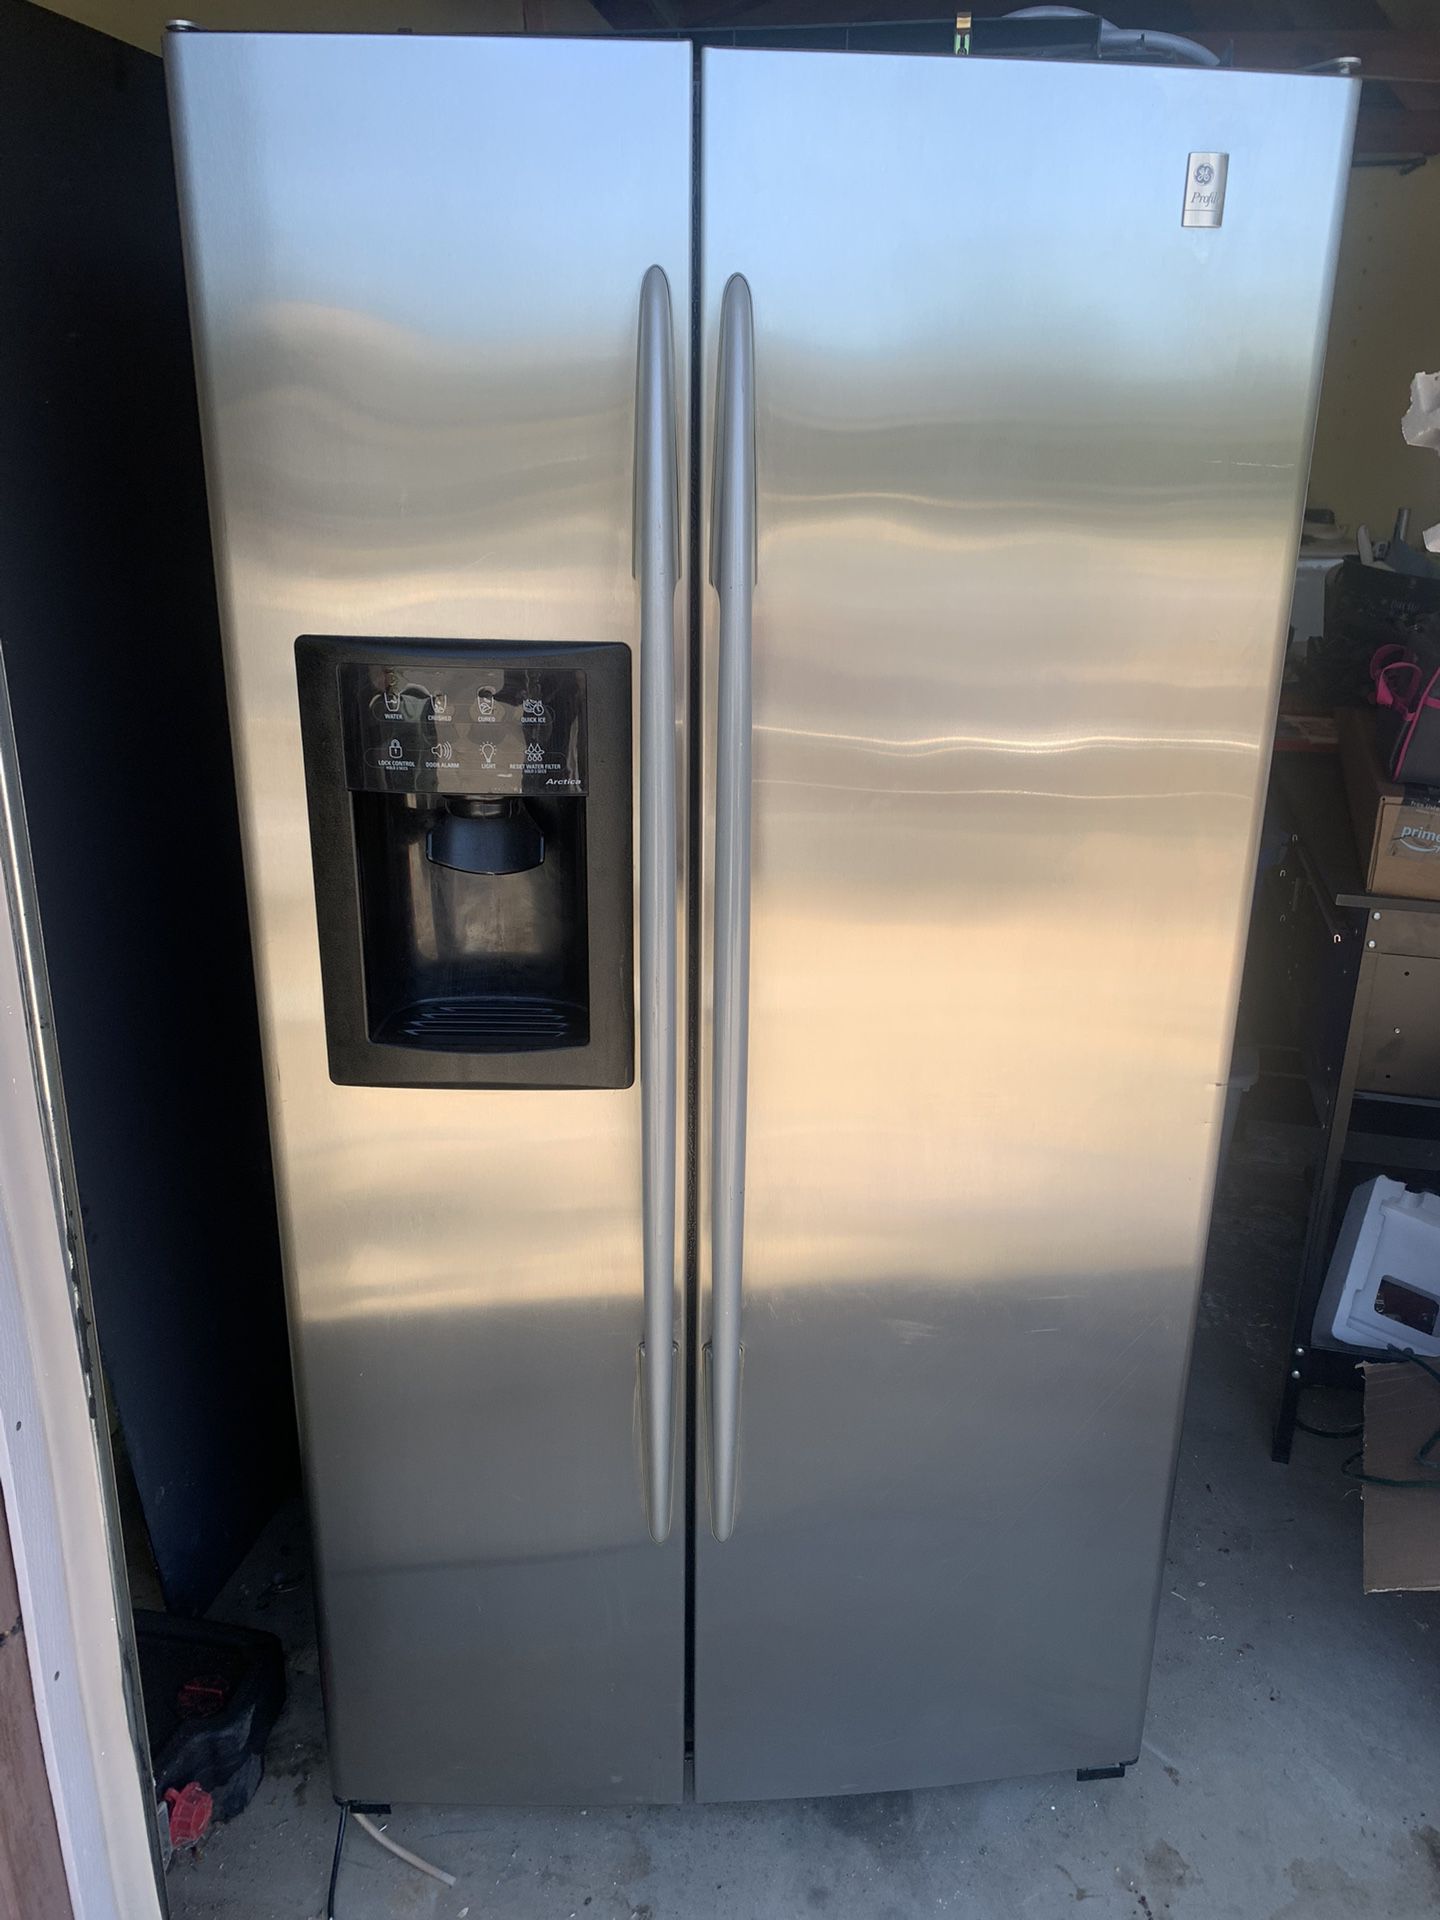 LG Refrigerator, Stainless Steel And Black $350